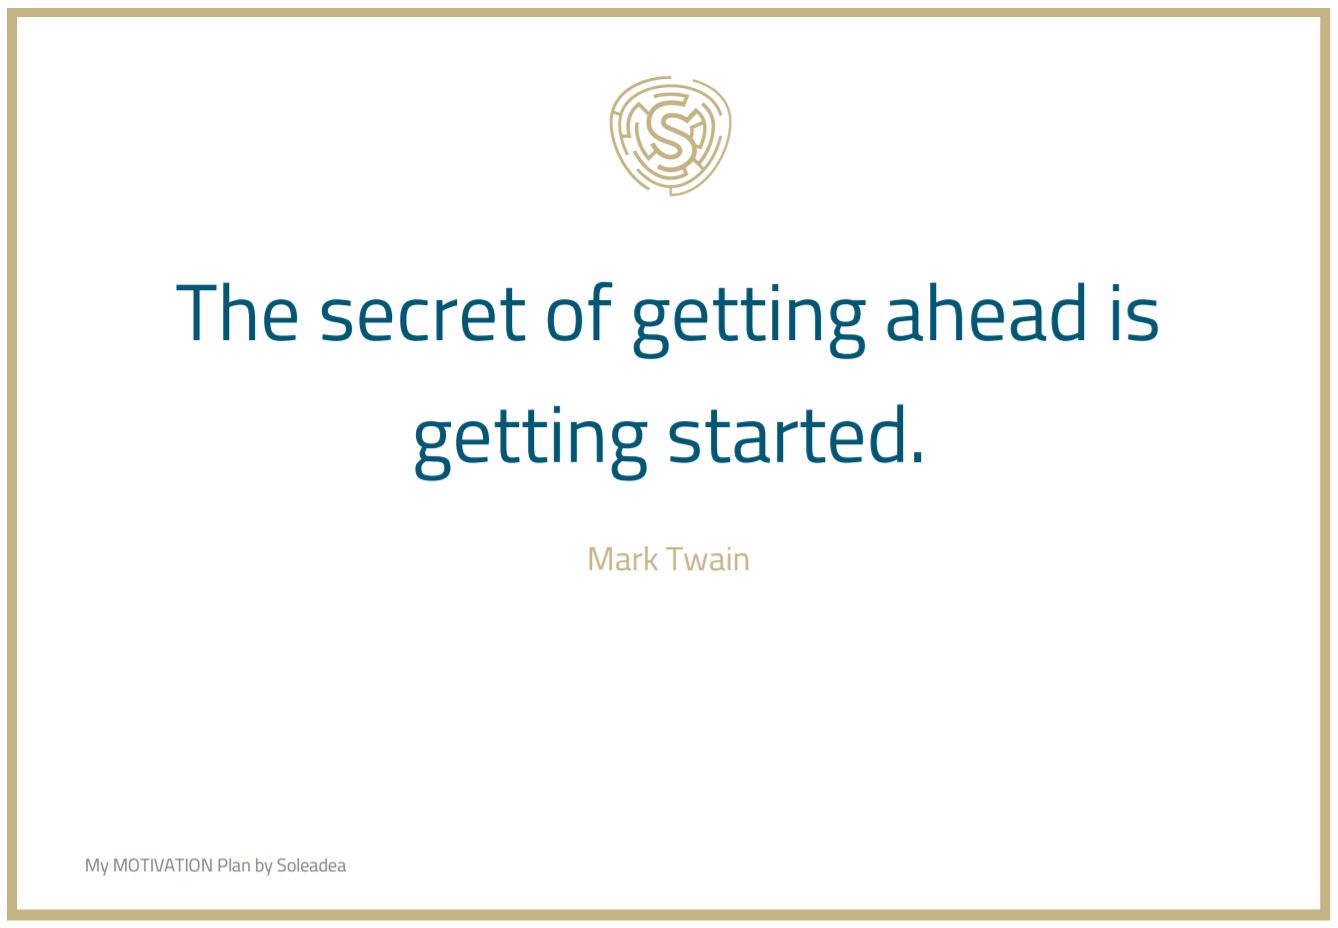 Motivation Quote: The secret of getting ahead is getting started / Mark Twain